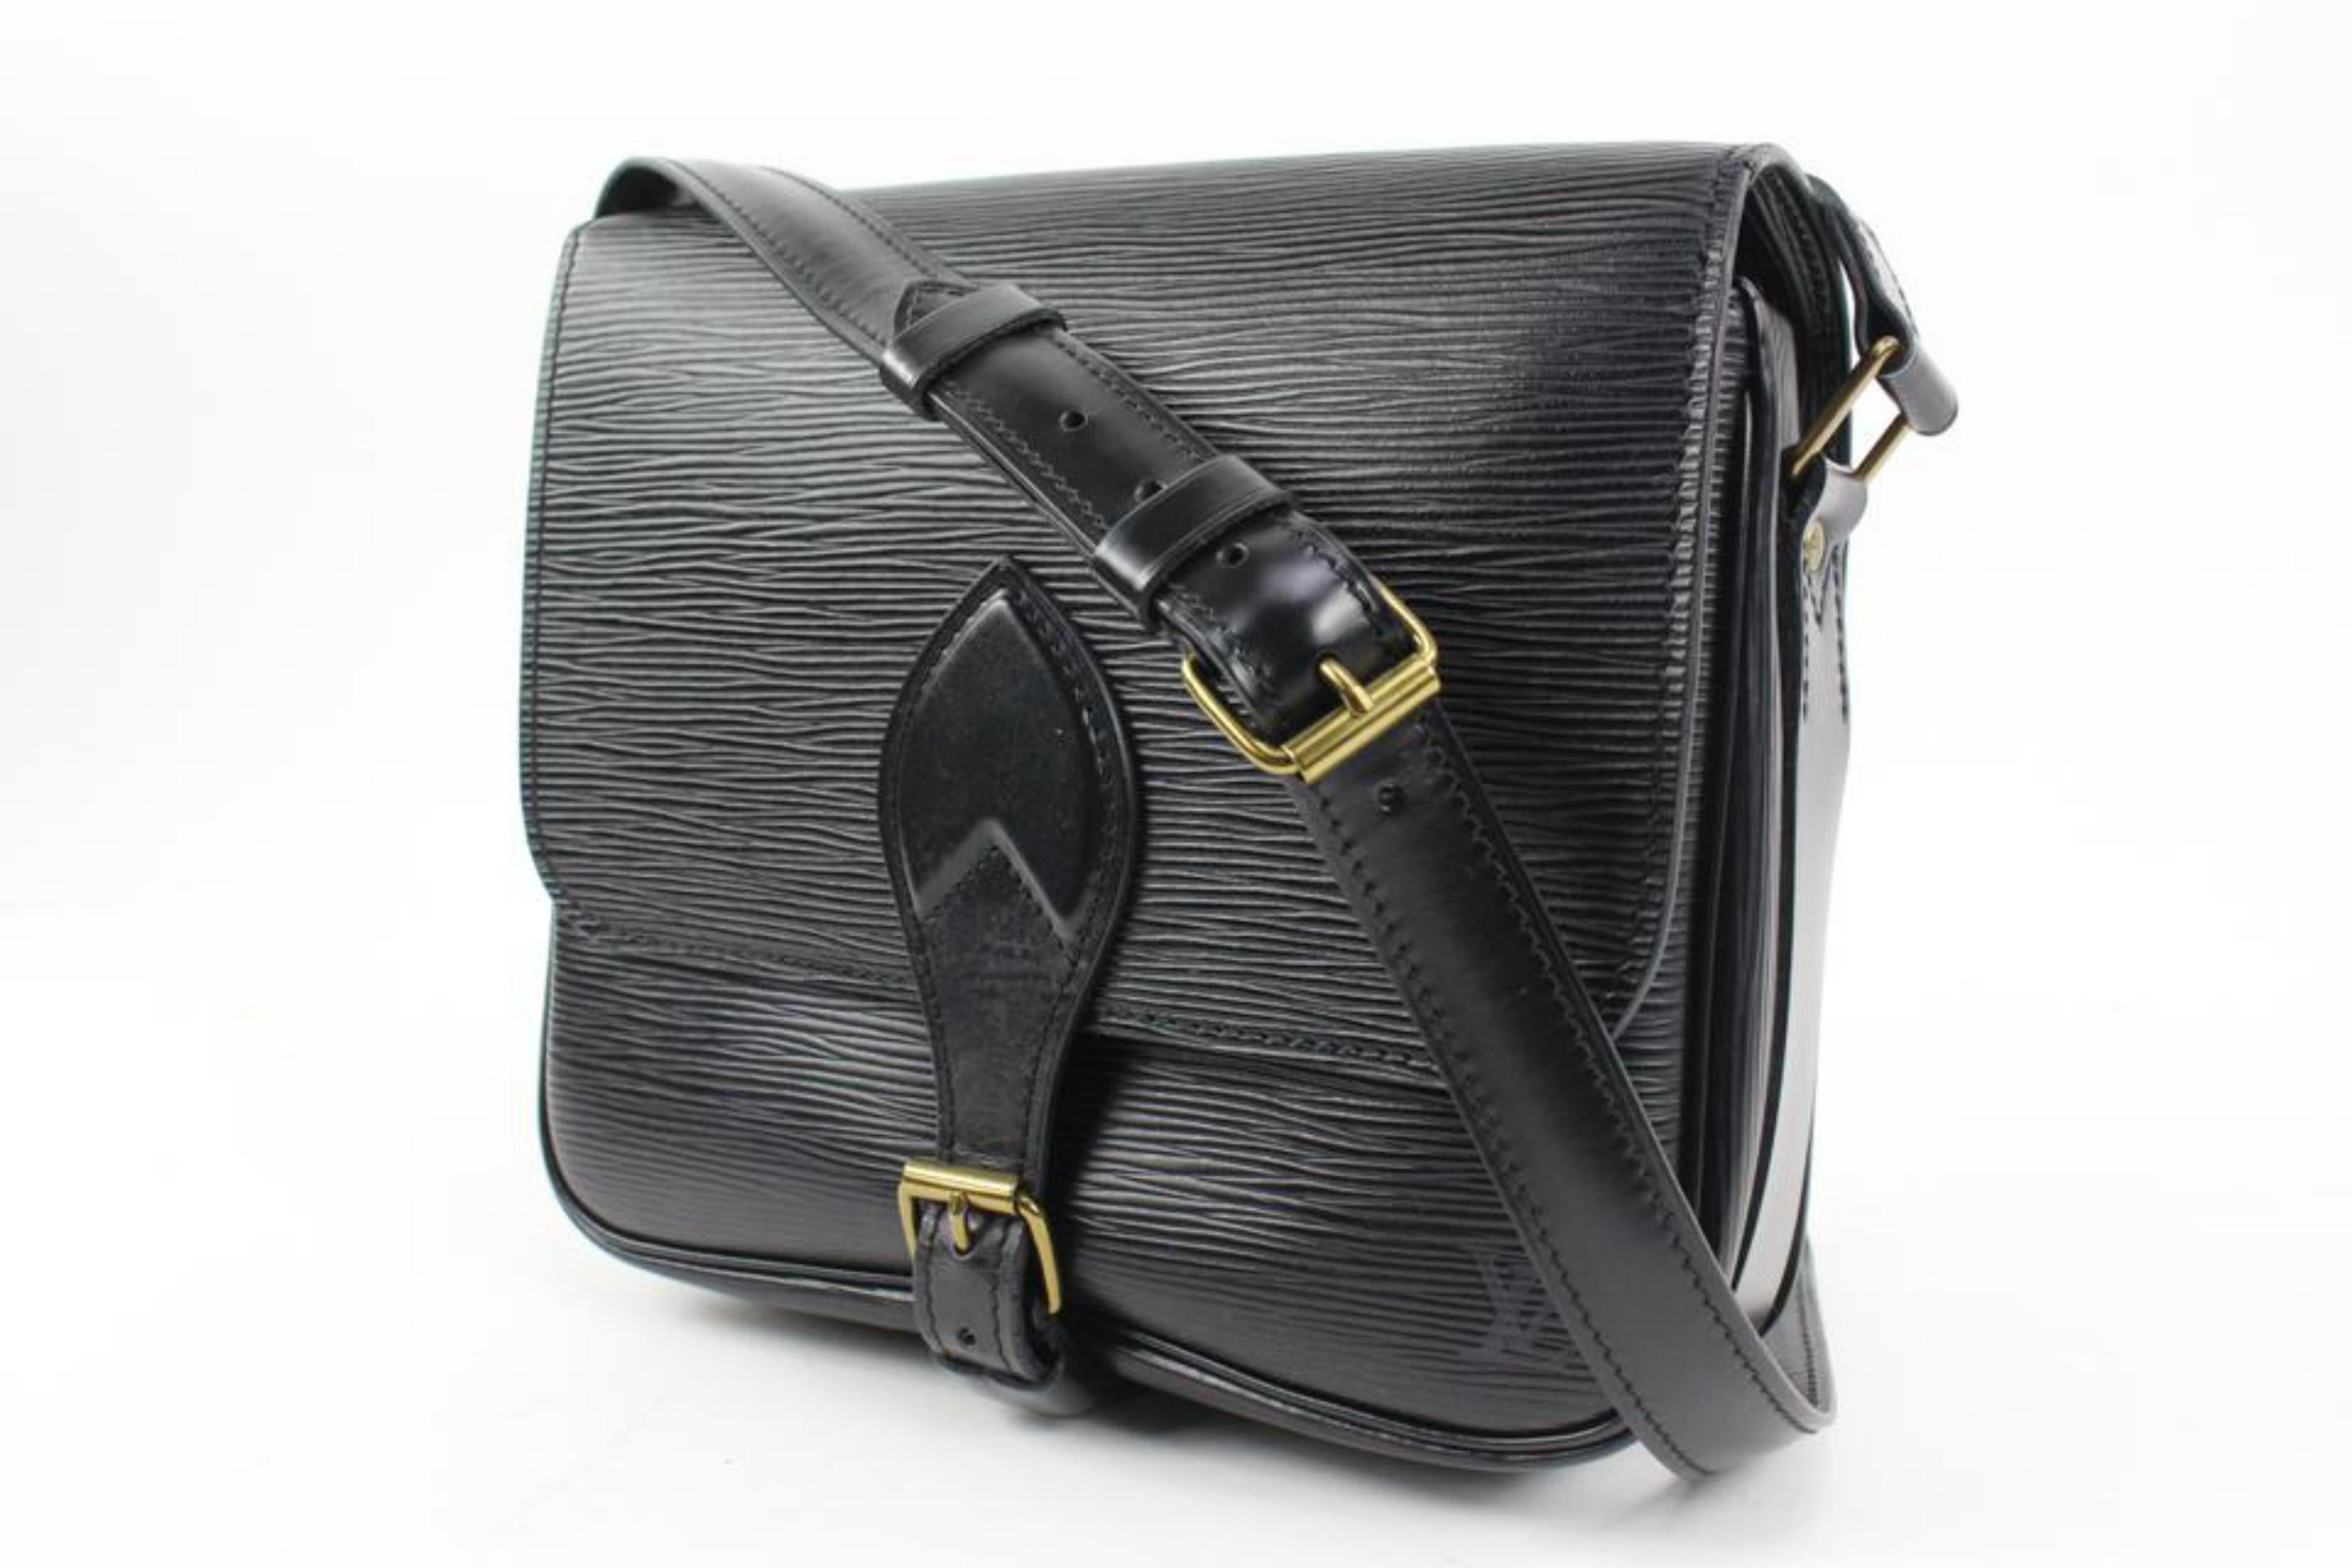 Louis Vuitton Black Epi Leather Noir Cartouchiere PM Crossbody Bag 96lv221s
Date Code/Serial Number: MI0961
Made In: France
Measurements: Length:  8.75